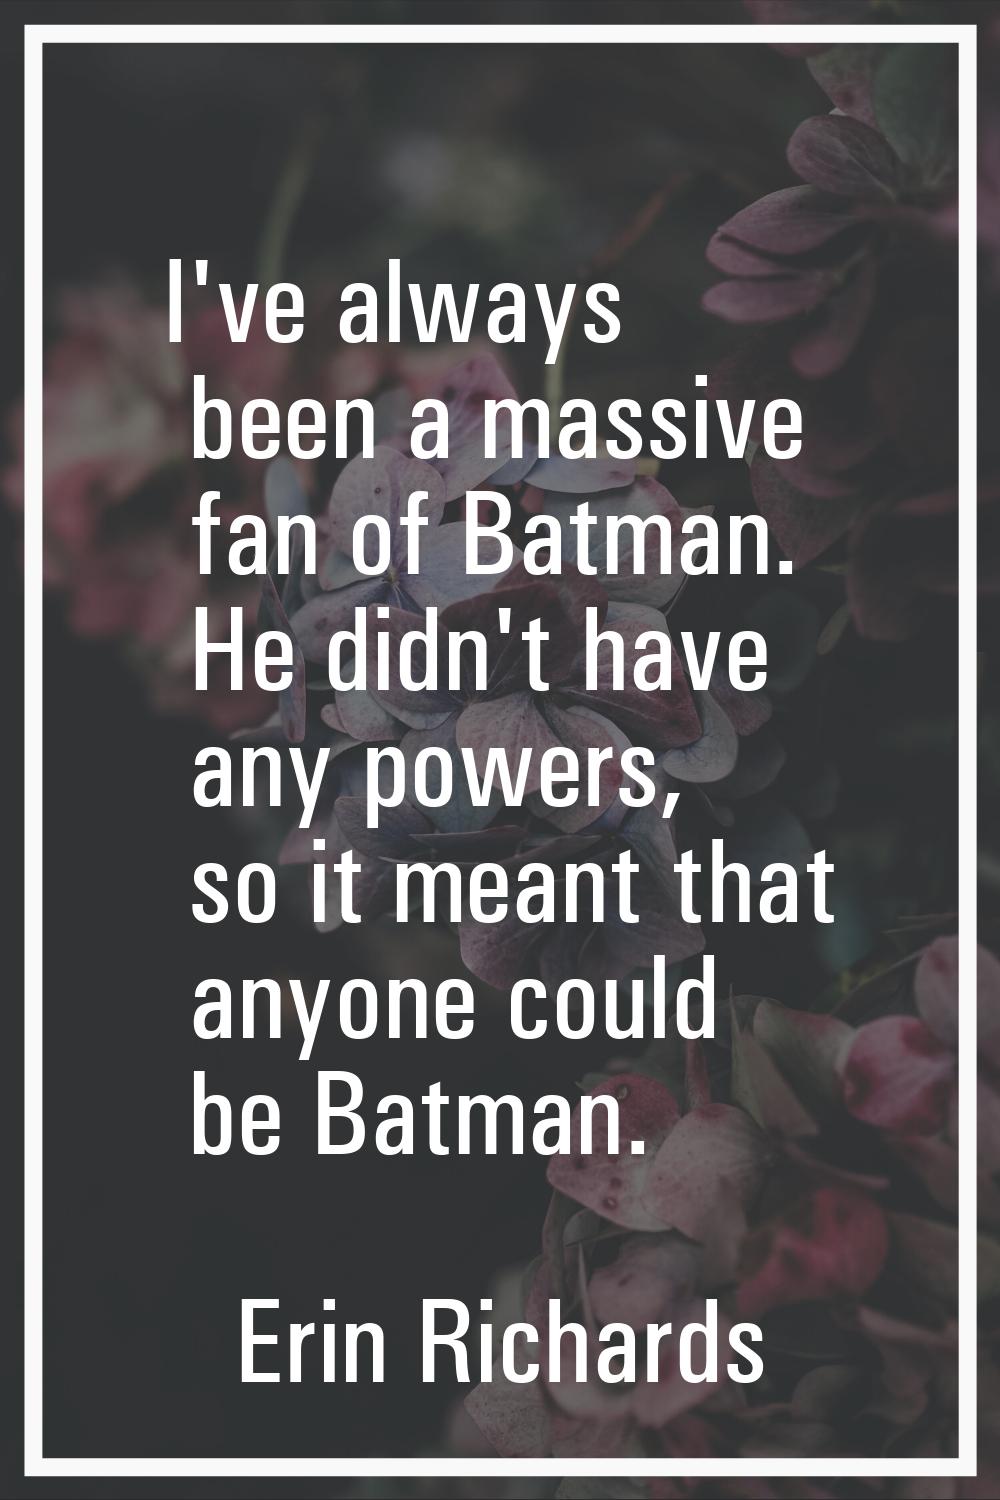 I've always been a massive fan of Batman. He didn't have any powers, so it meant that anyone could 